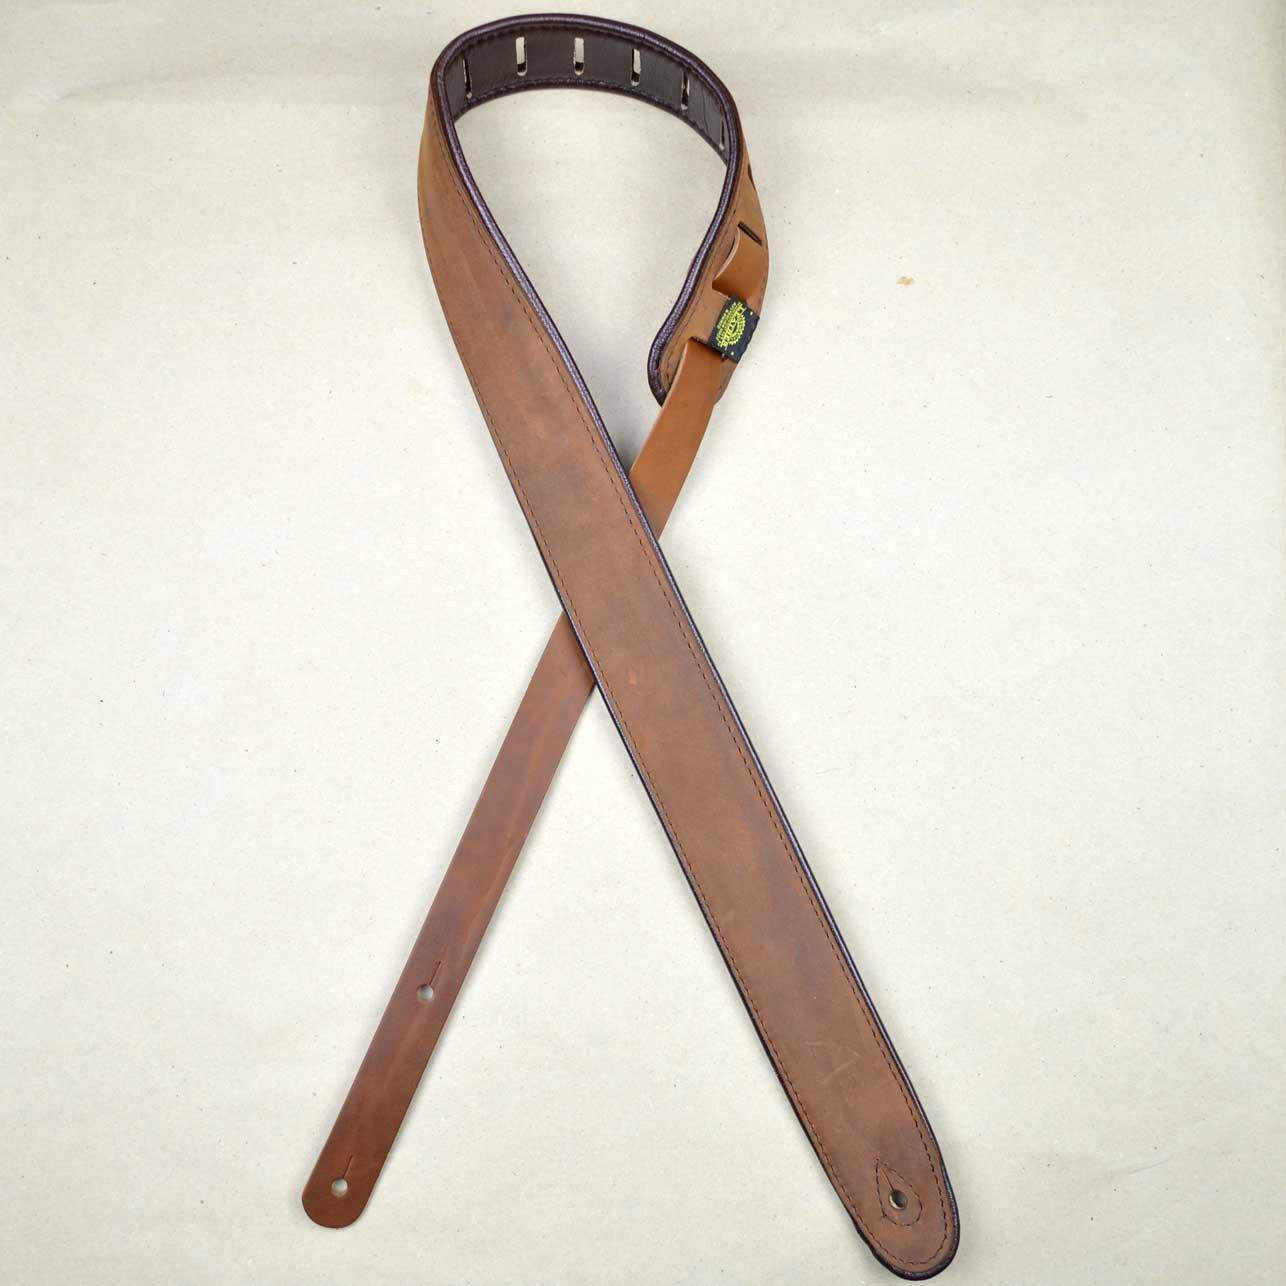 2″ Padded Upholstery Leather Guitar Strap Tan & Brown - Straps by Colonial Leather at Muso's Stuff